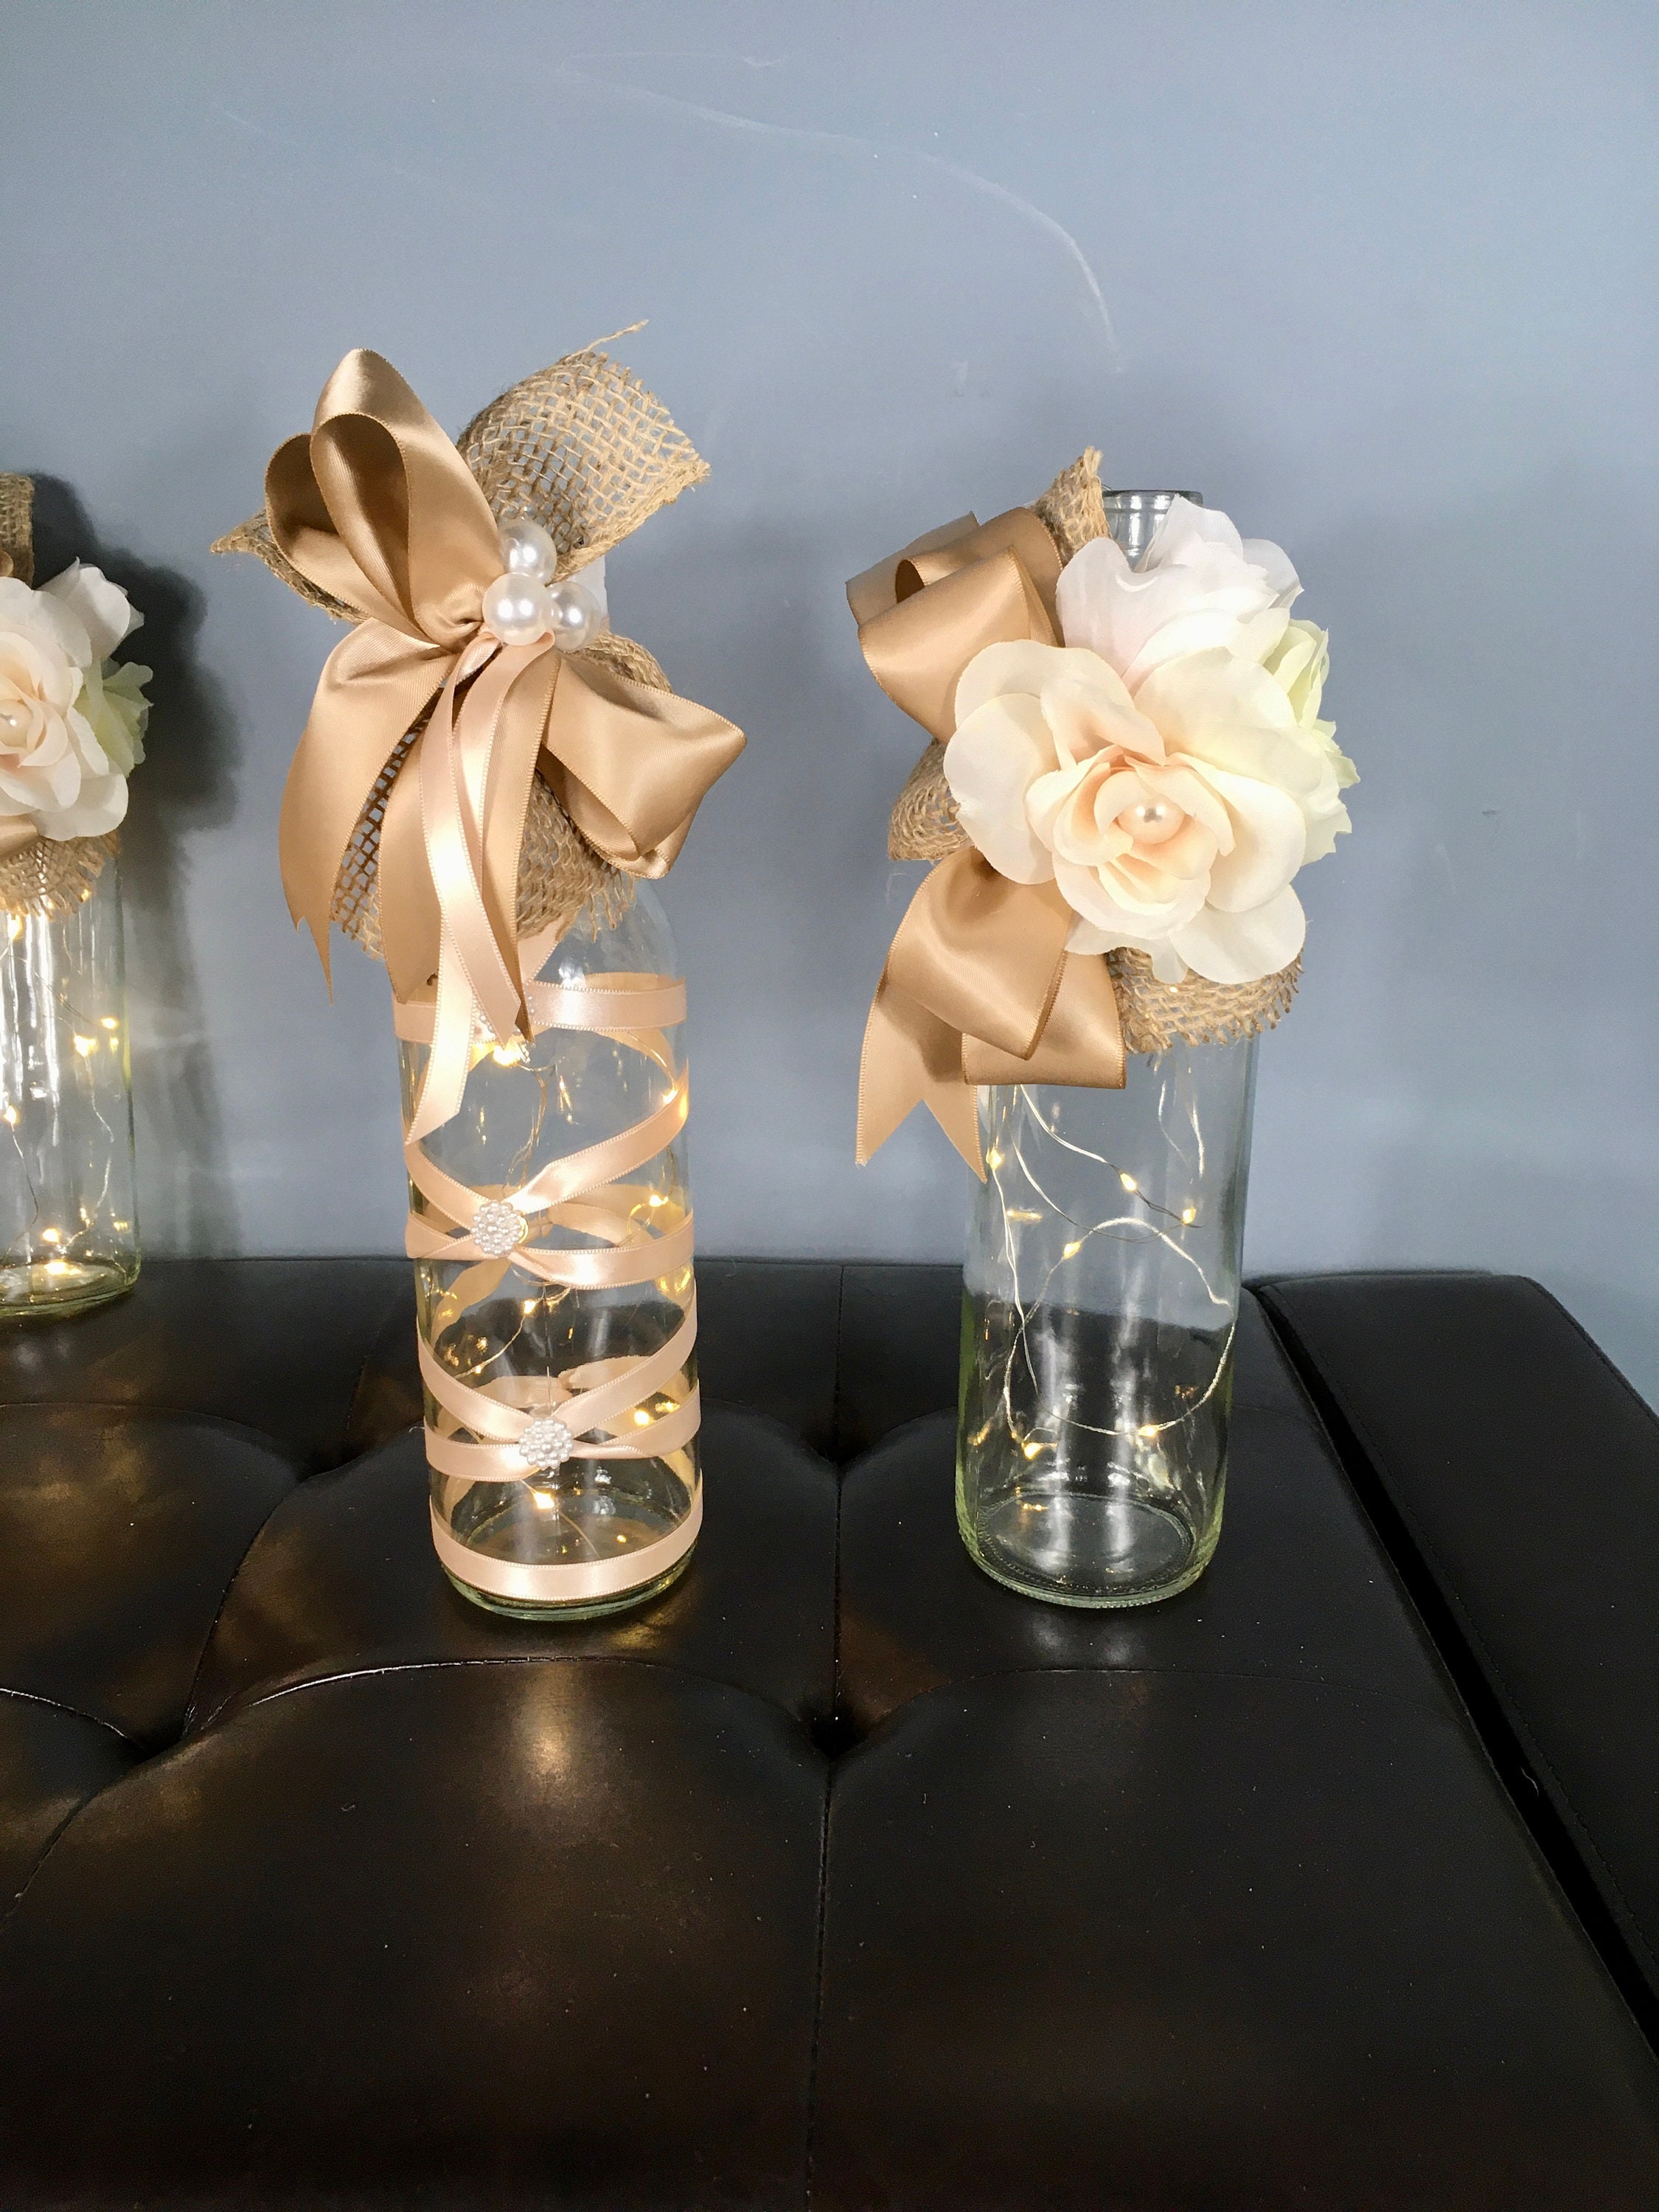 wine bottles with candles (I'd use twinkly lights), centerpiece